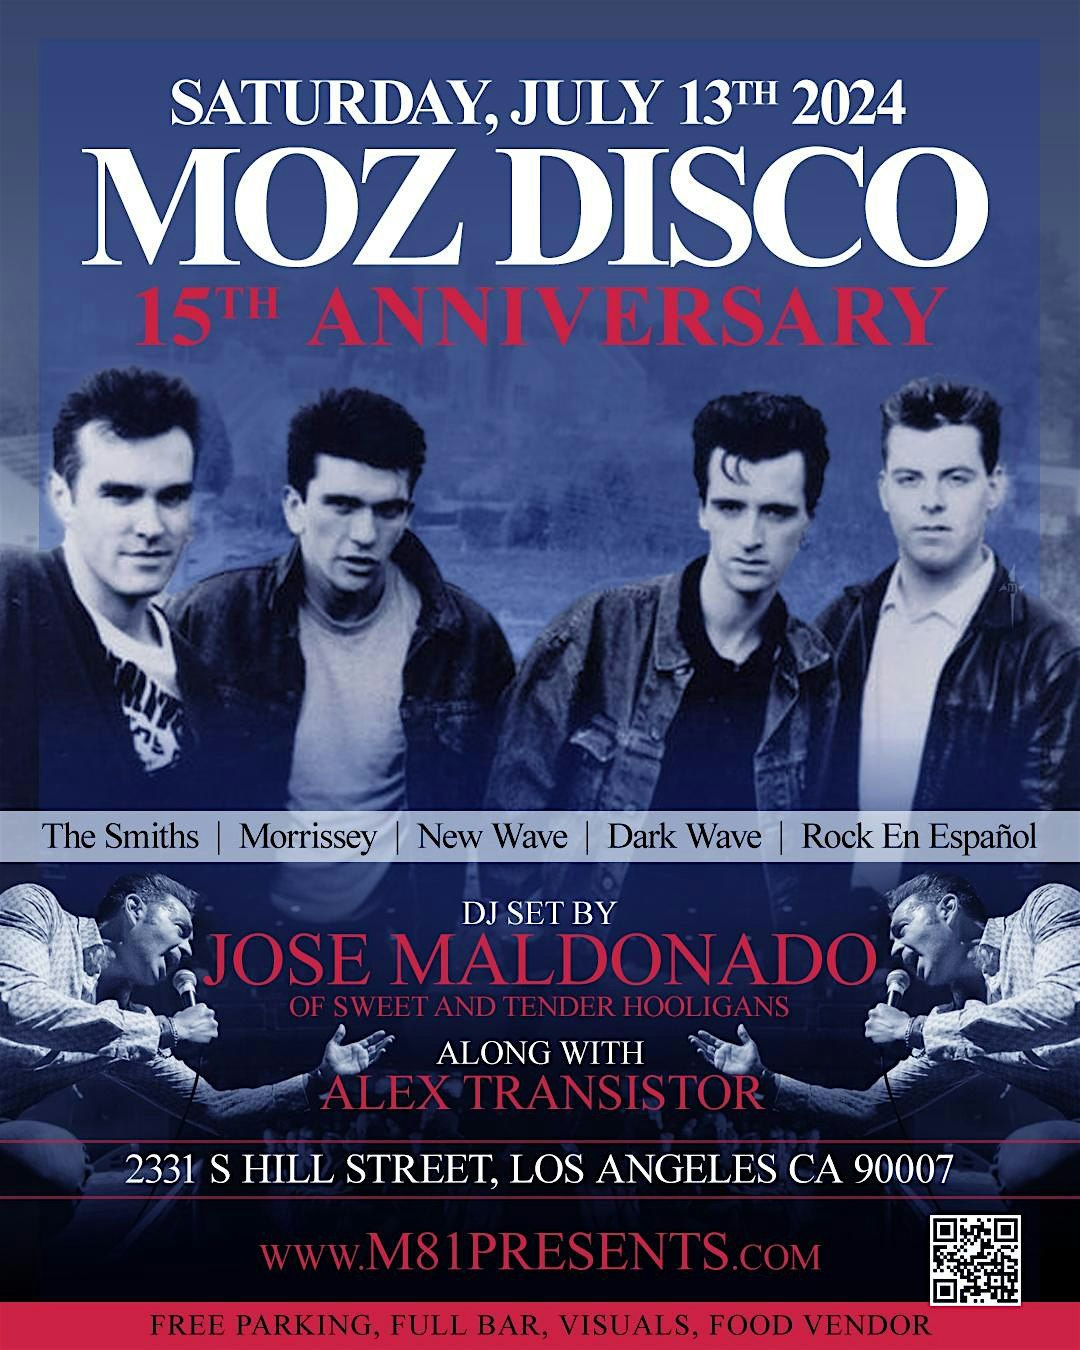 Moz Disco 15 Year Anniversary - Morrissey and Smiths Dance Night